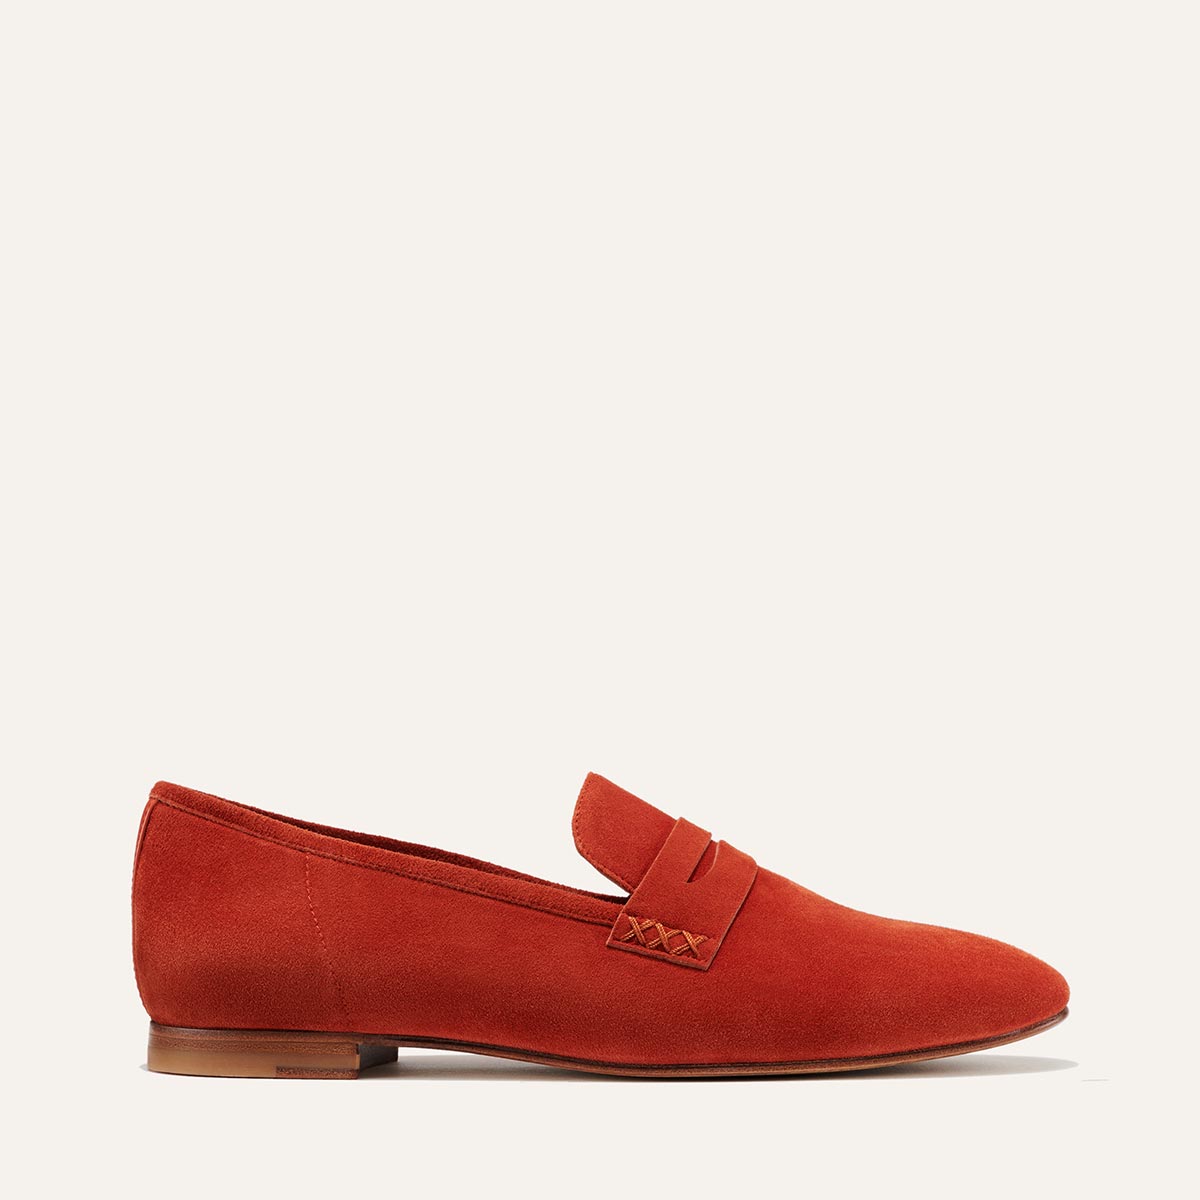 Margaux's classic and comfortable Penny loafer, made in a soft, sedona orange Italian suede